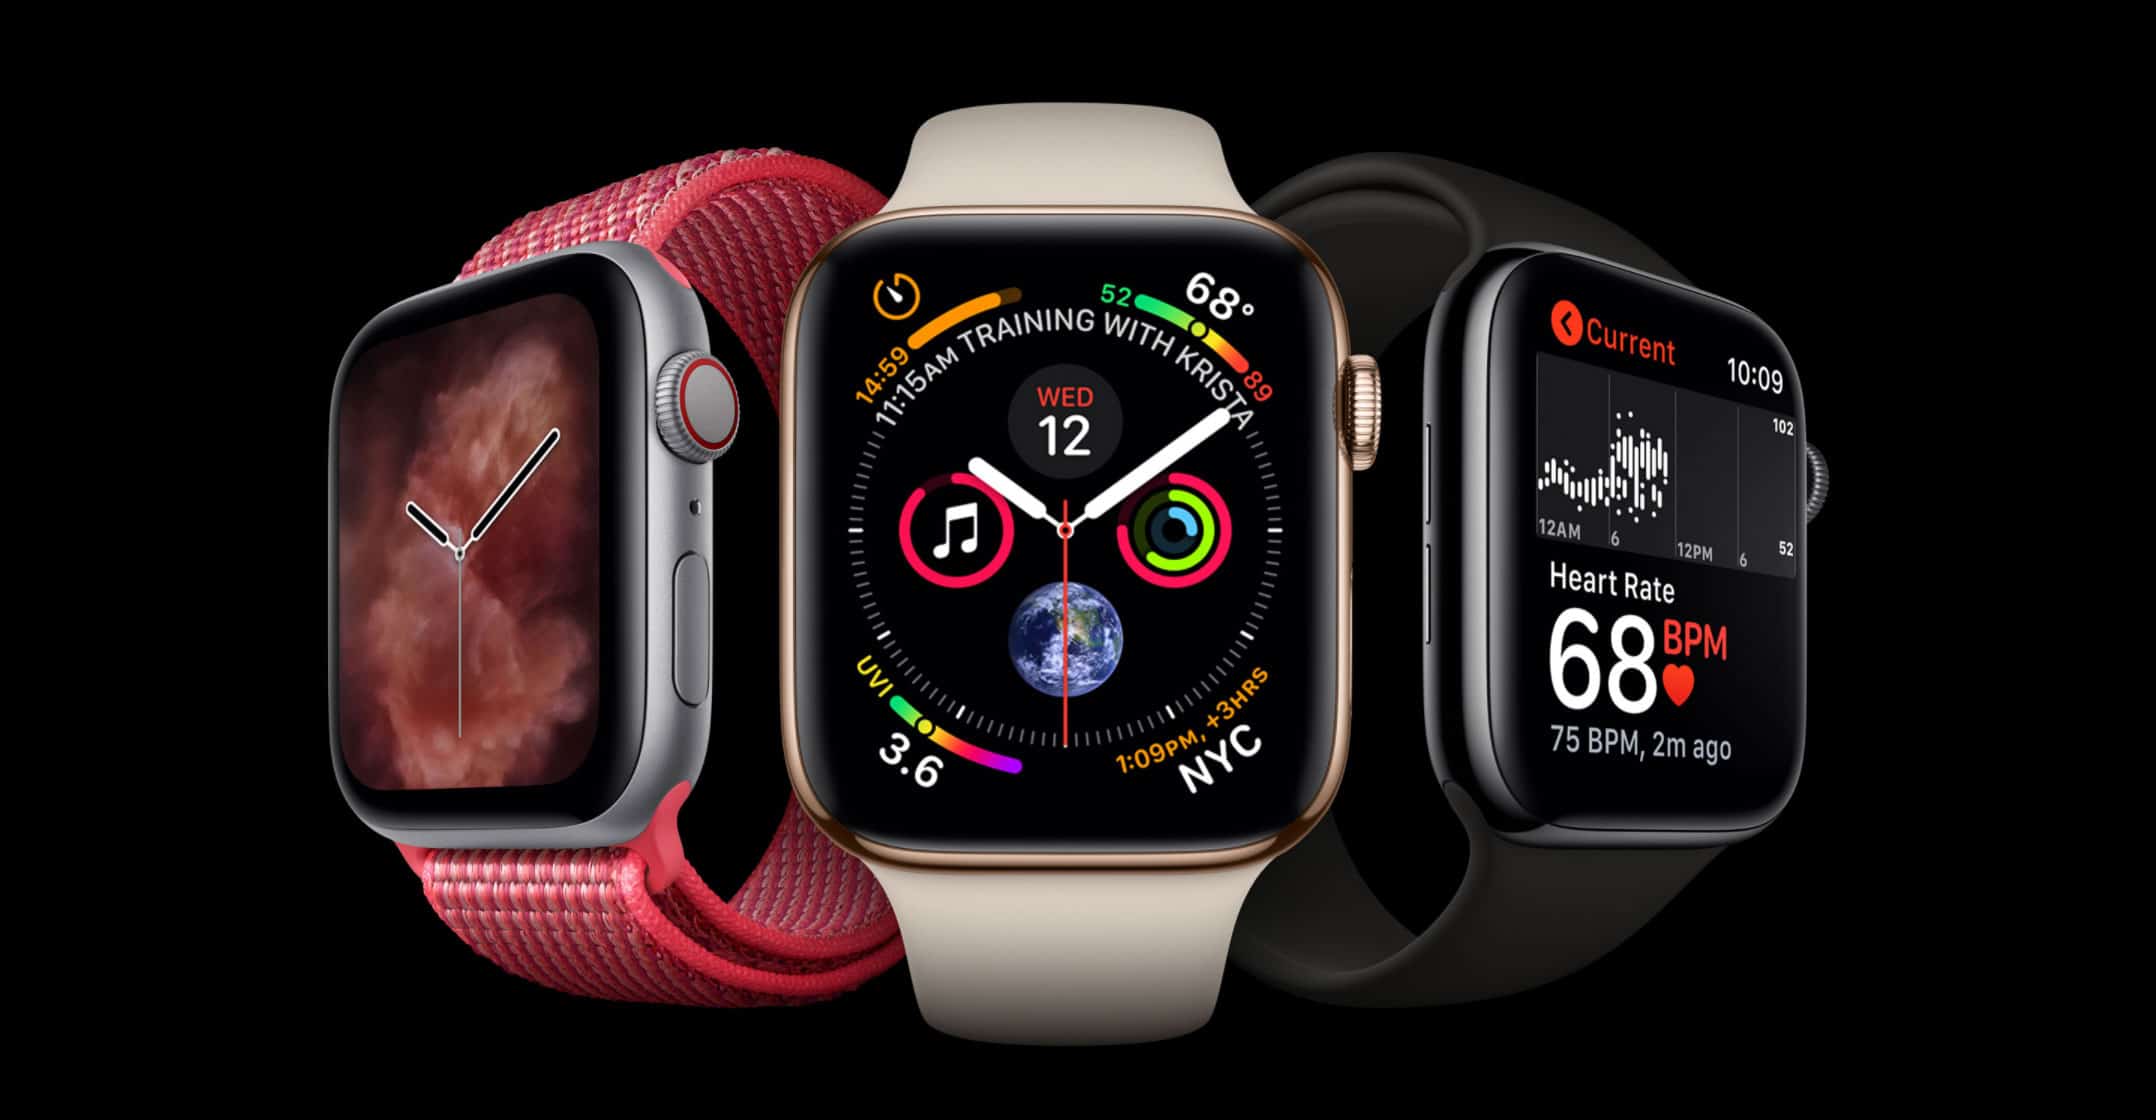 Your Apple Watch Series 4 can now run detailed Electrocardiogram tests